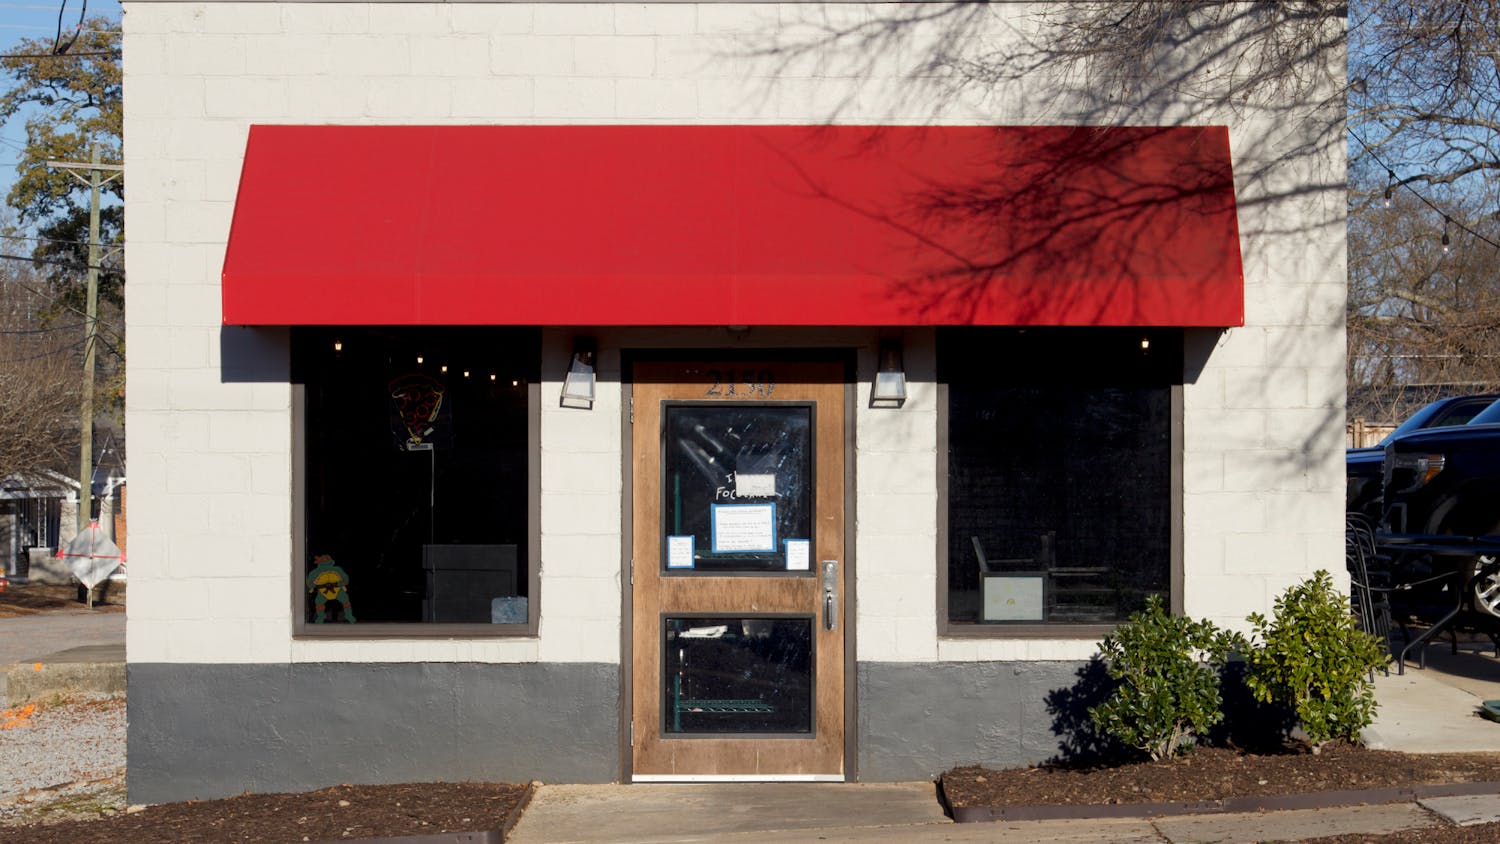 Il Focolare offers a variety of pizzas including red or white sauce and is a great option for a date night. It stands alone at 2150 Sumter St. in Columbia, SC.